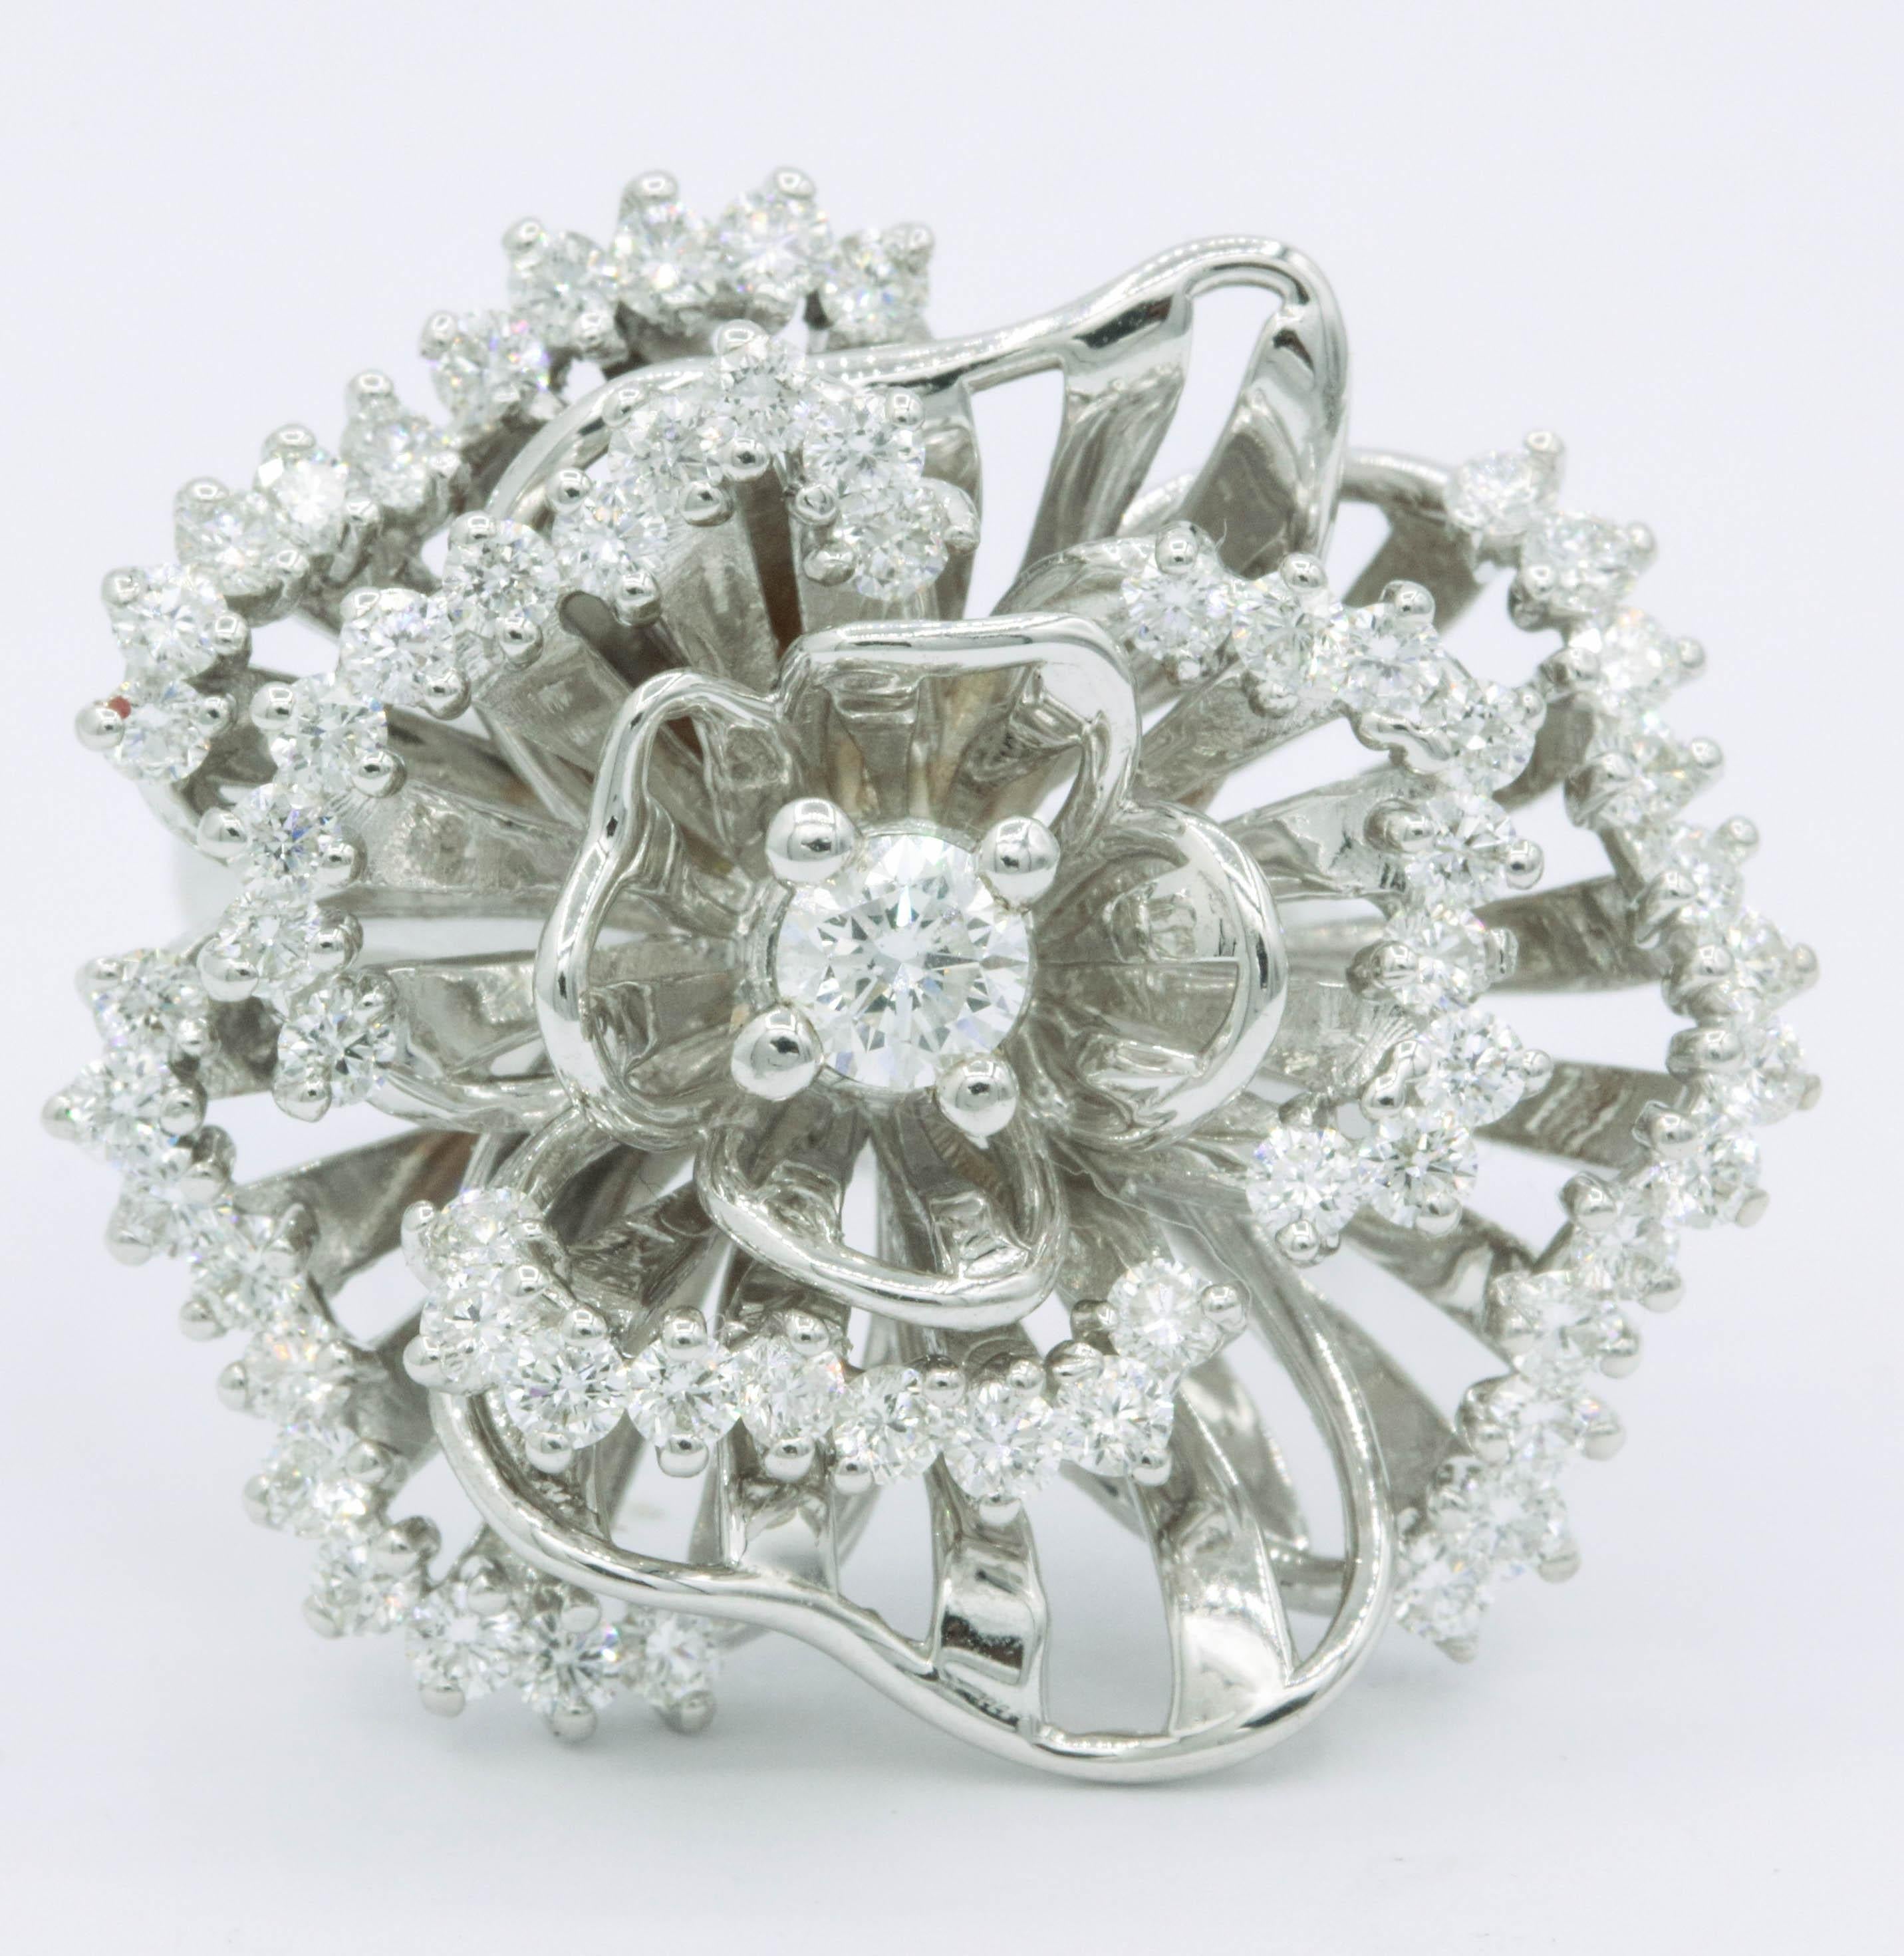 This fashionable floral ring features 63 round brilliants weighing 1.84 carats, crafted in 18k white gold. 
Center White sapphire
Color: F-G
Clarity: SI